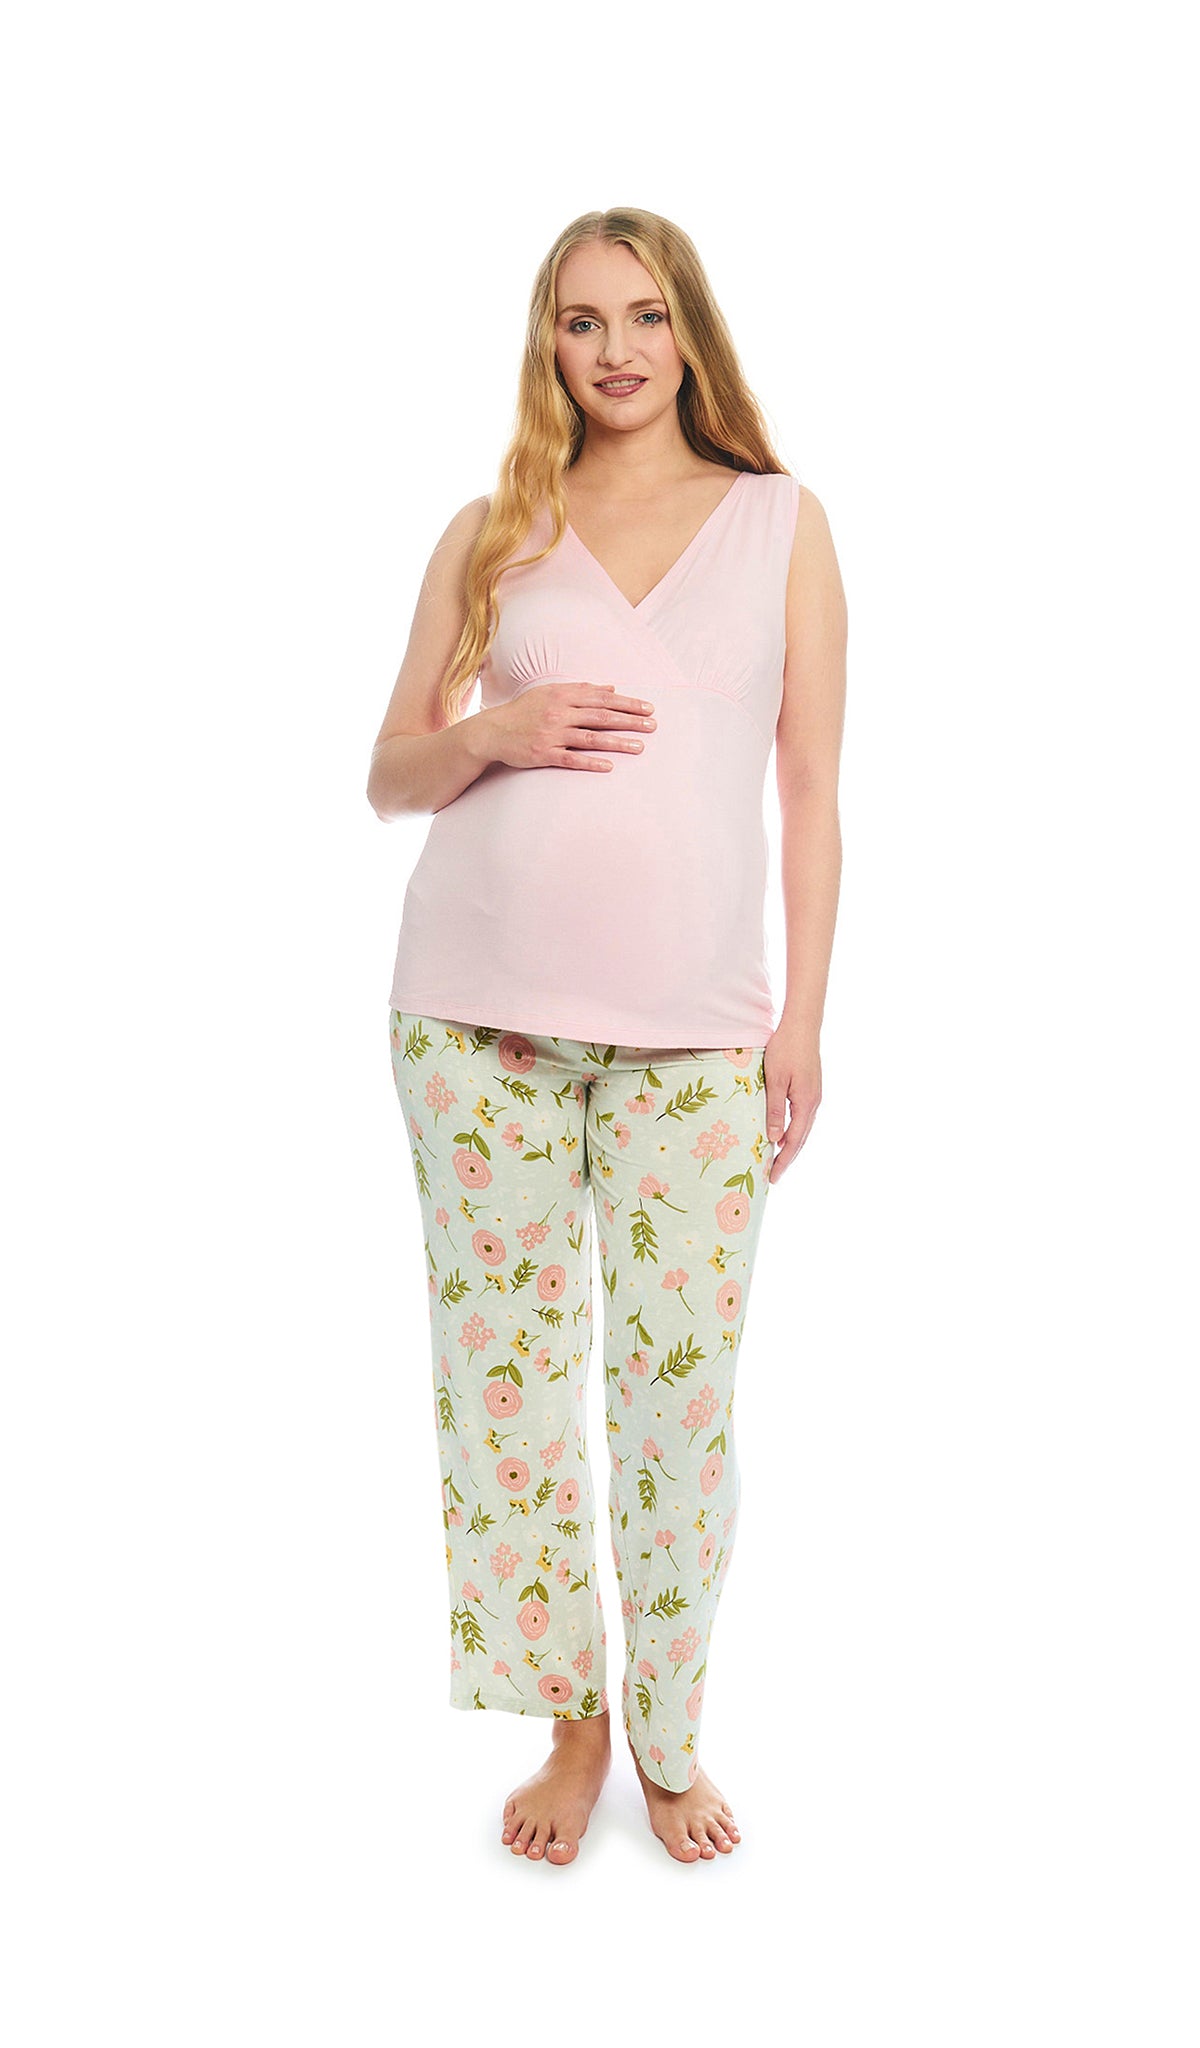 Carnation Analise 3-Piece Set, pregnant woman wearing criss-cross bust tank top and pant with one hand on belly.